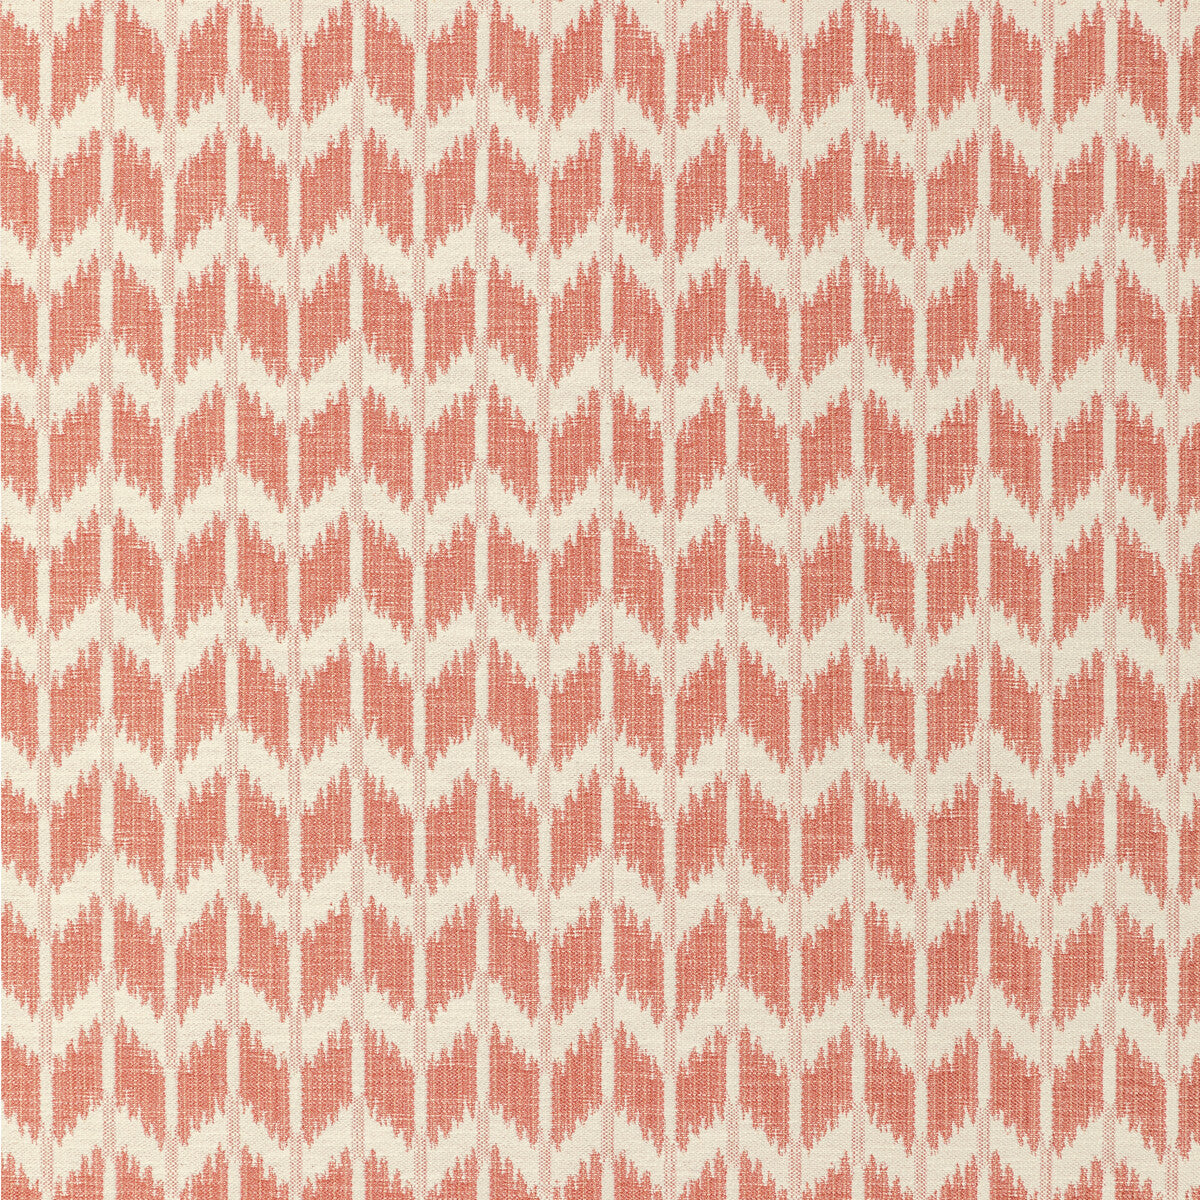 Lorient Weave fabric in petal color - pattern 8022111.7.0 - by Brunschwig &amp; Fils in the Lorient Weaves collection